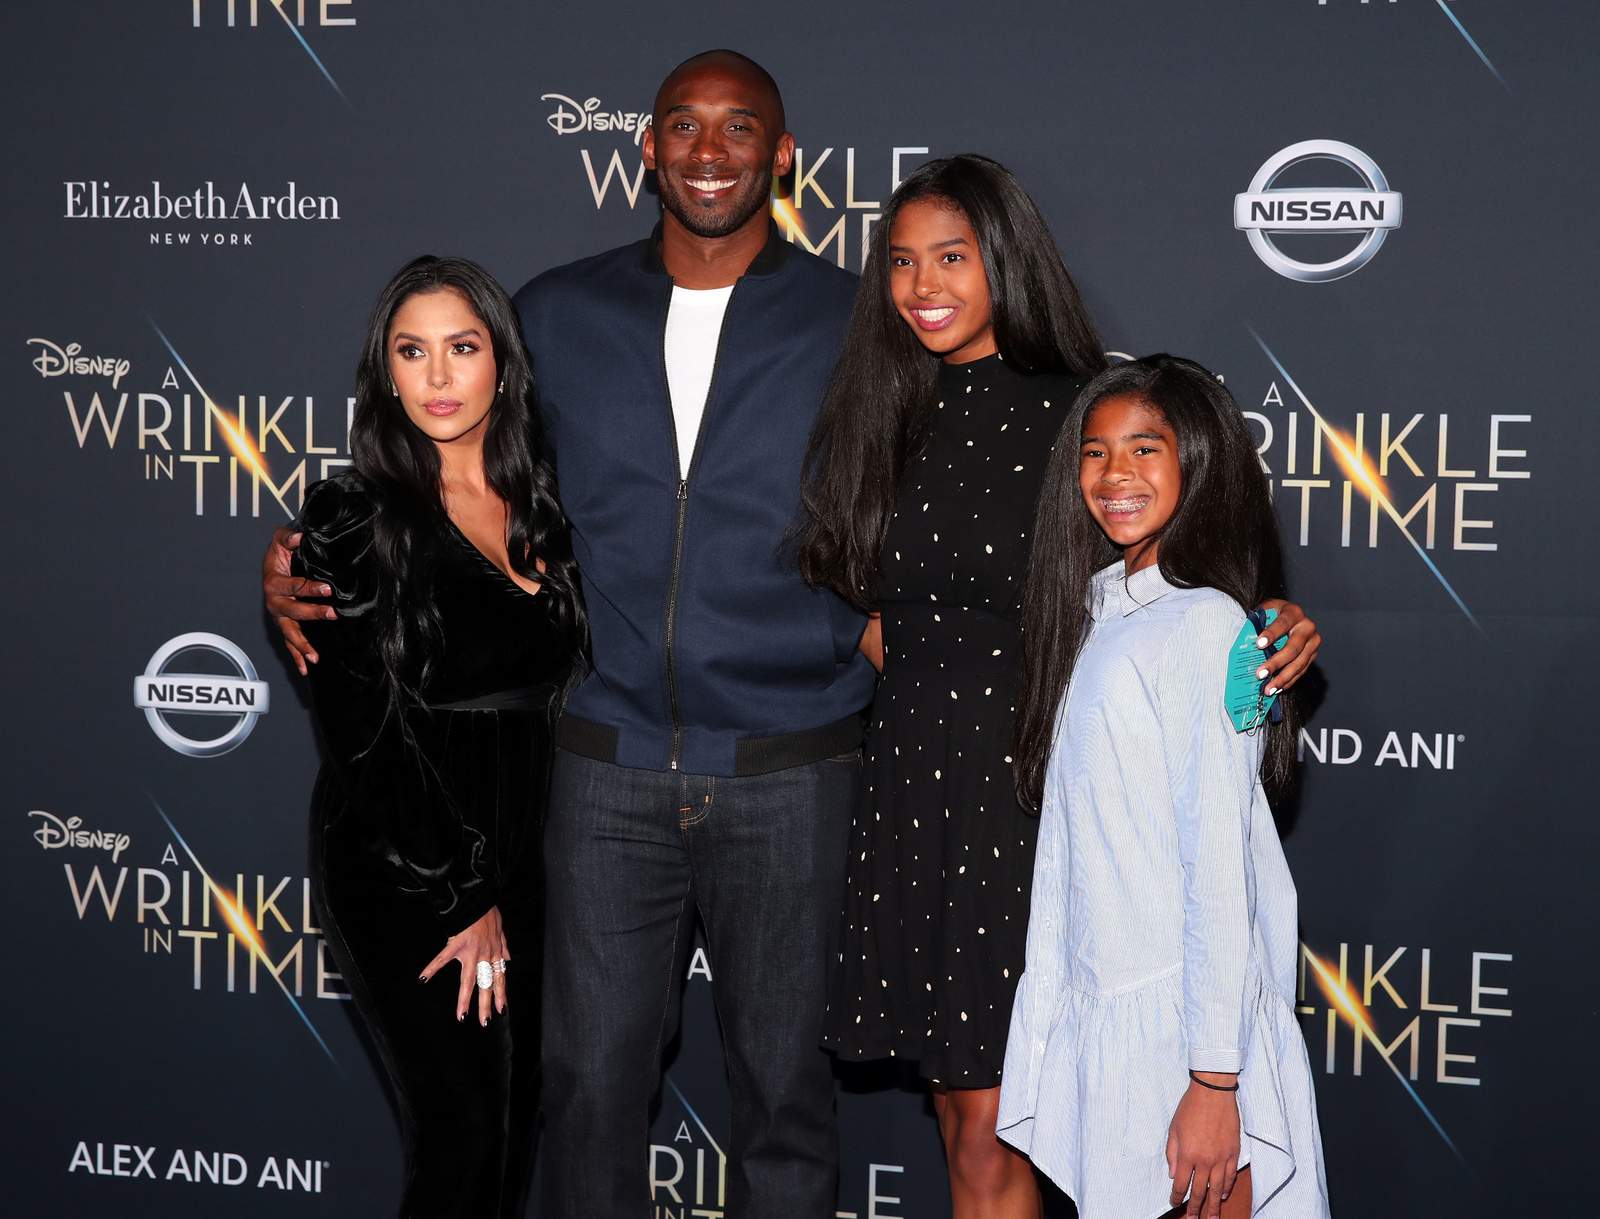 Vanessa Bryant posts on Instagram for the first time since Kobe’s death